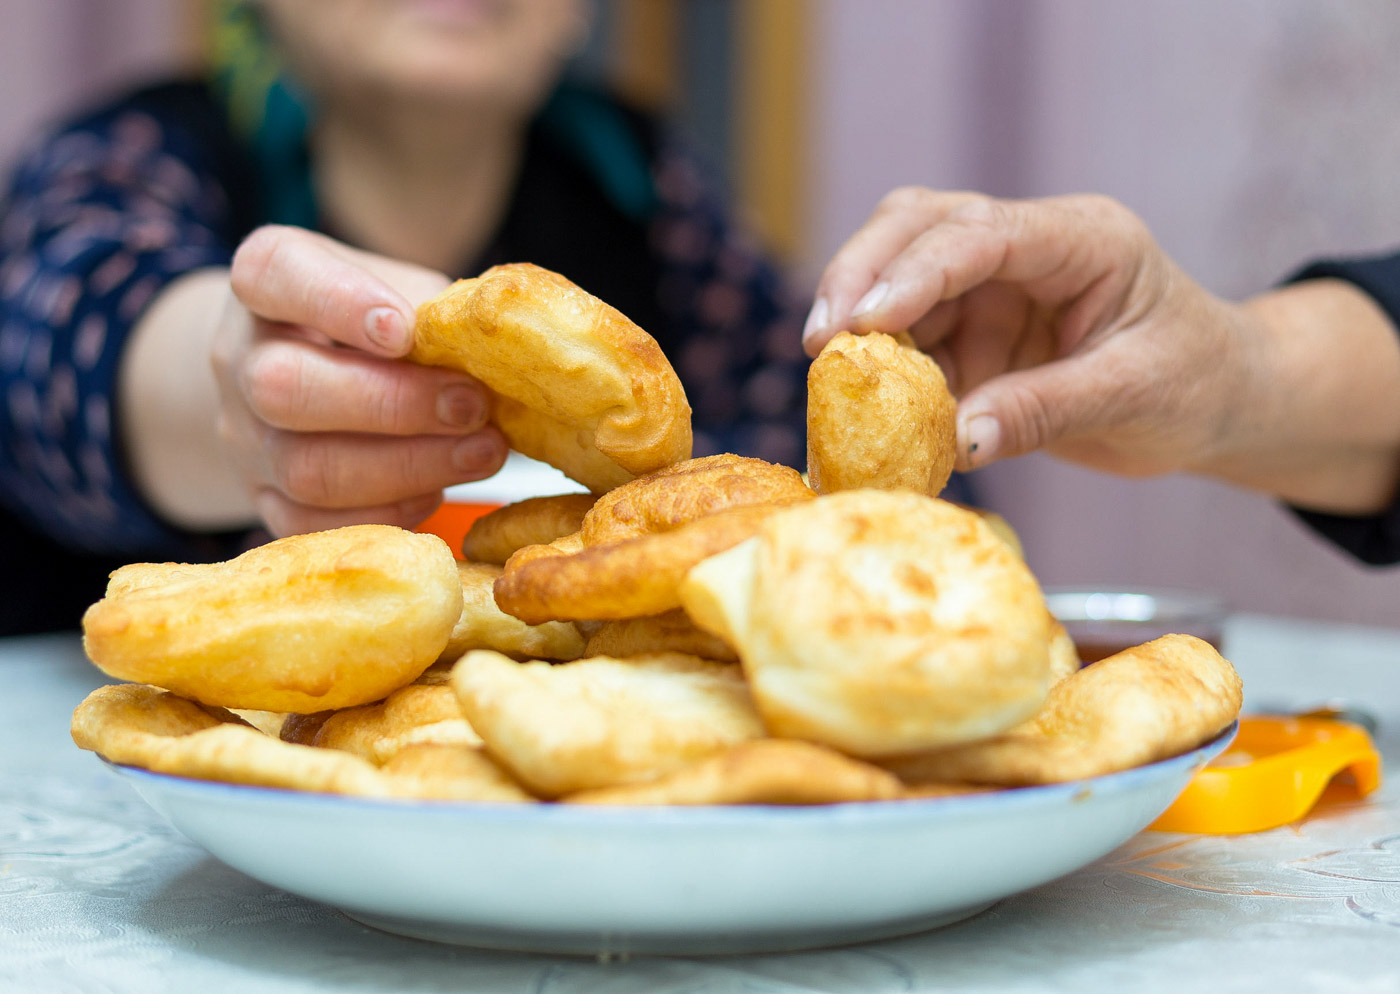 Boortsog is another popular snack, made of fried dough 